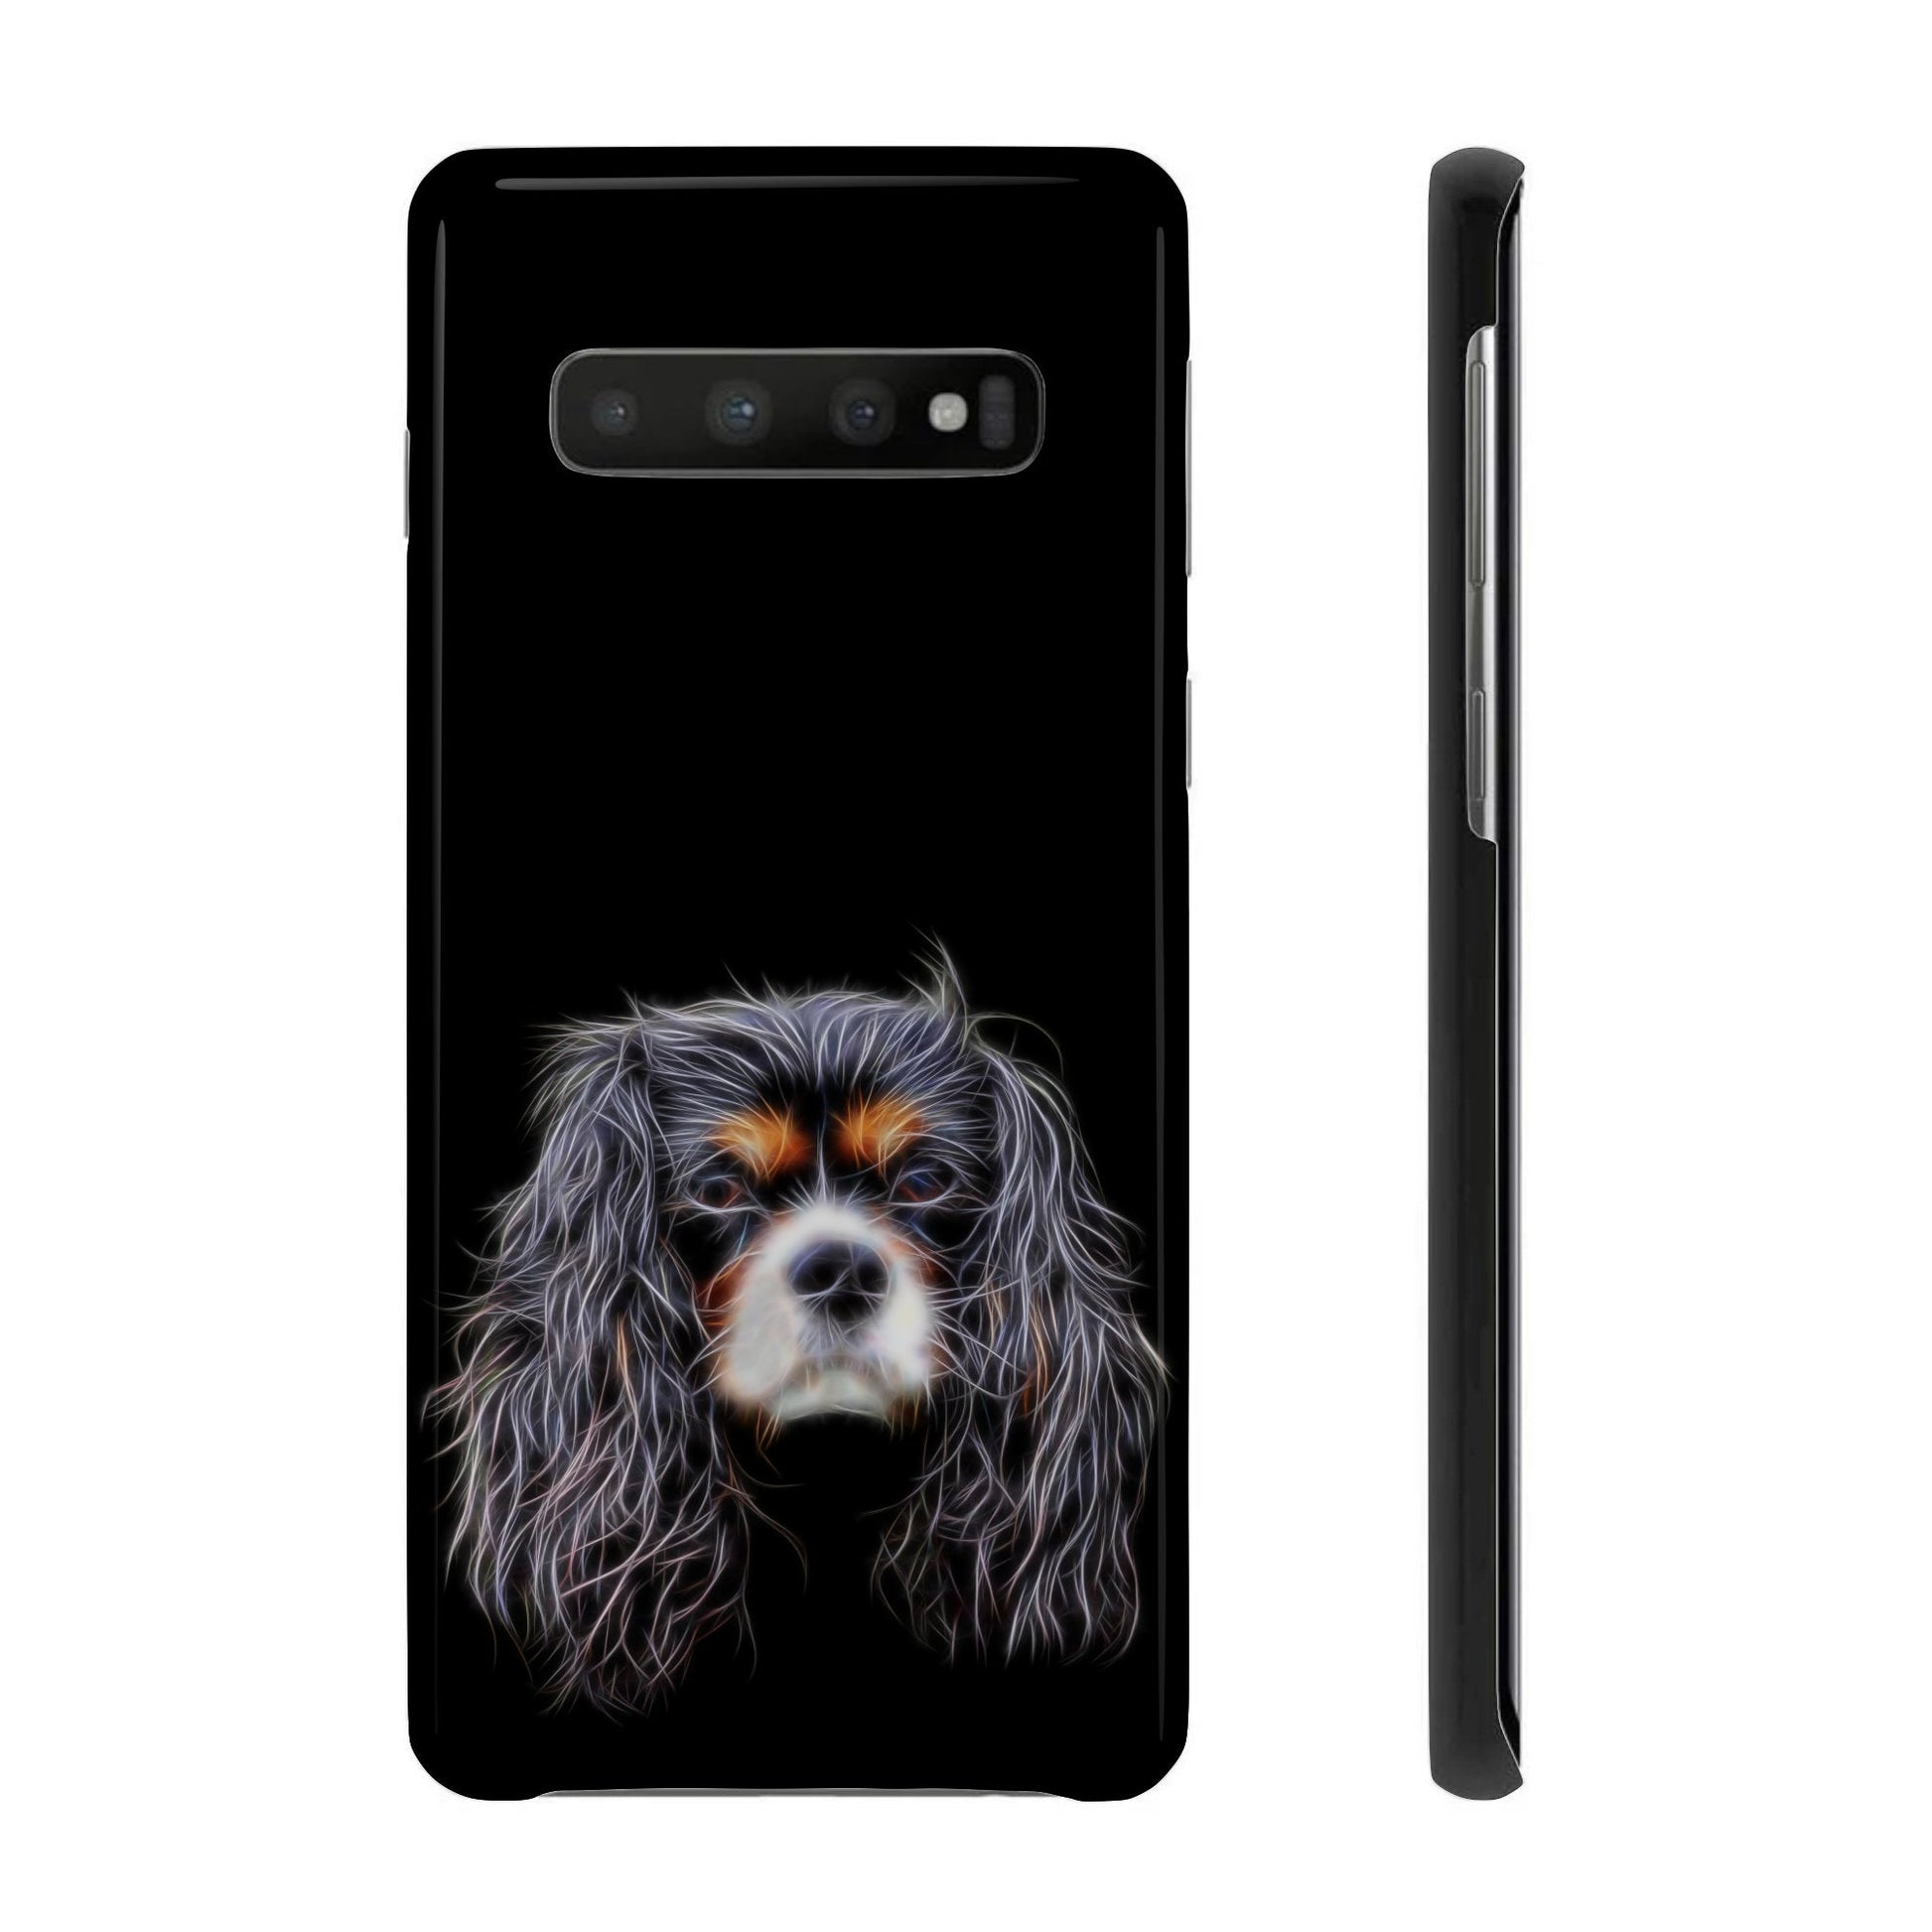 Tricolour King Charles Spaniel Phone Cases with Stunning Fractal Art Design. For Samsung or iPhone.